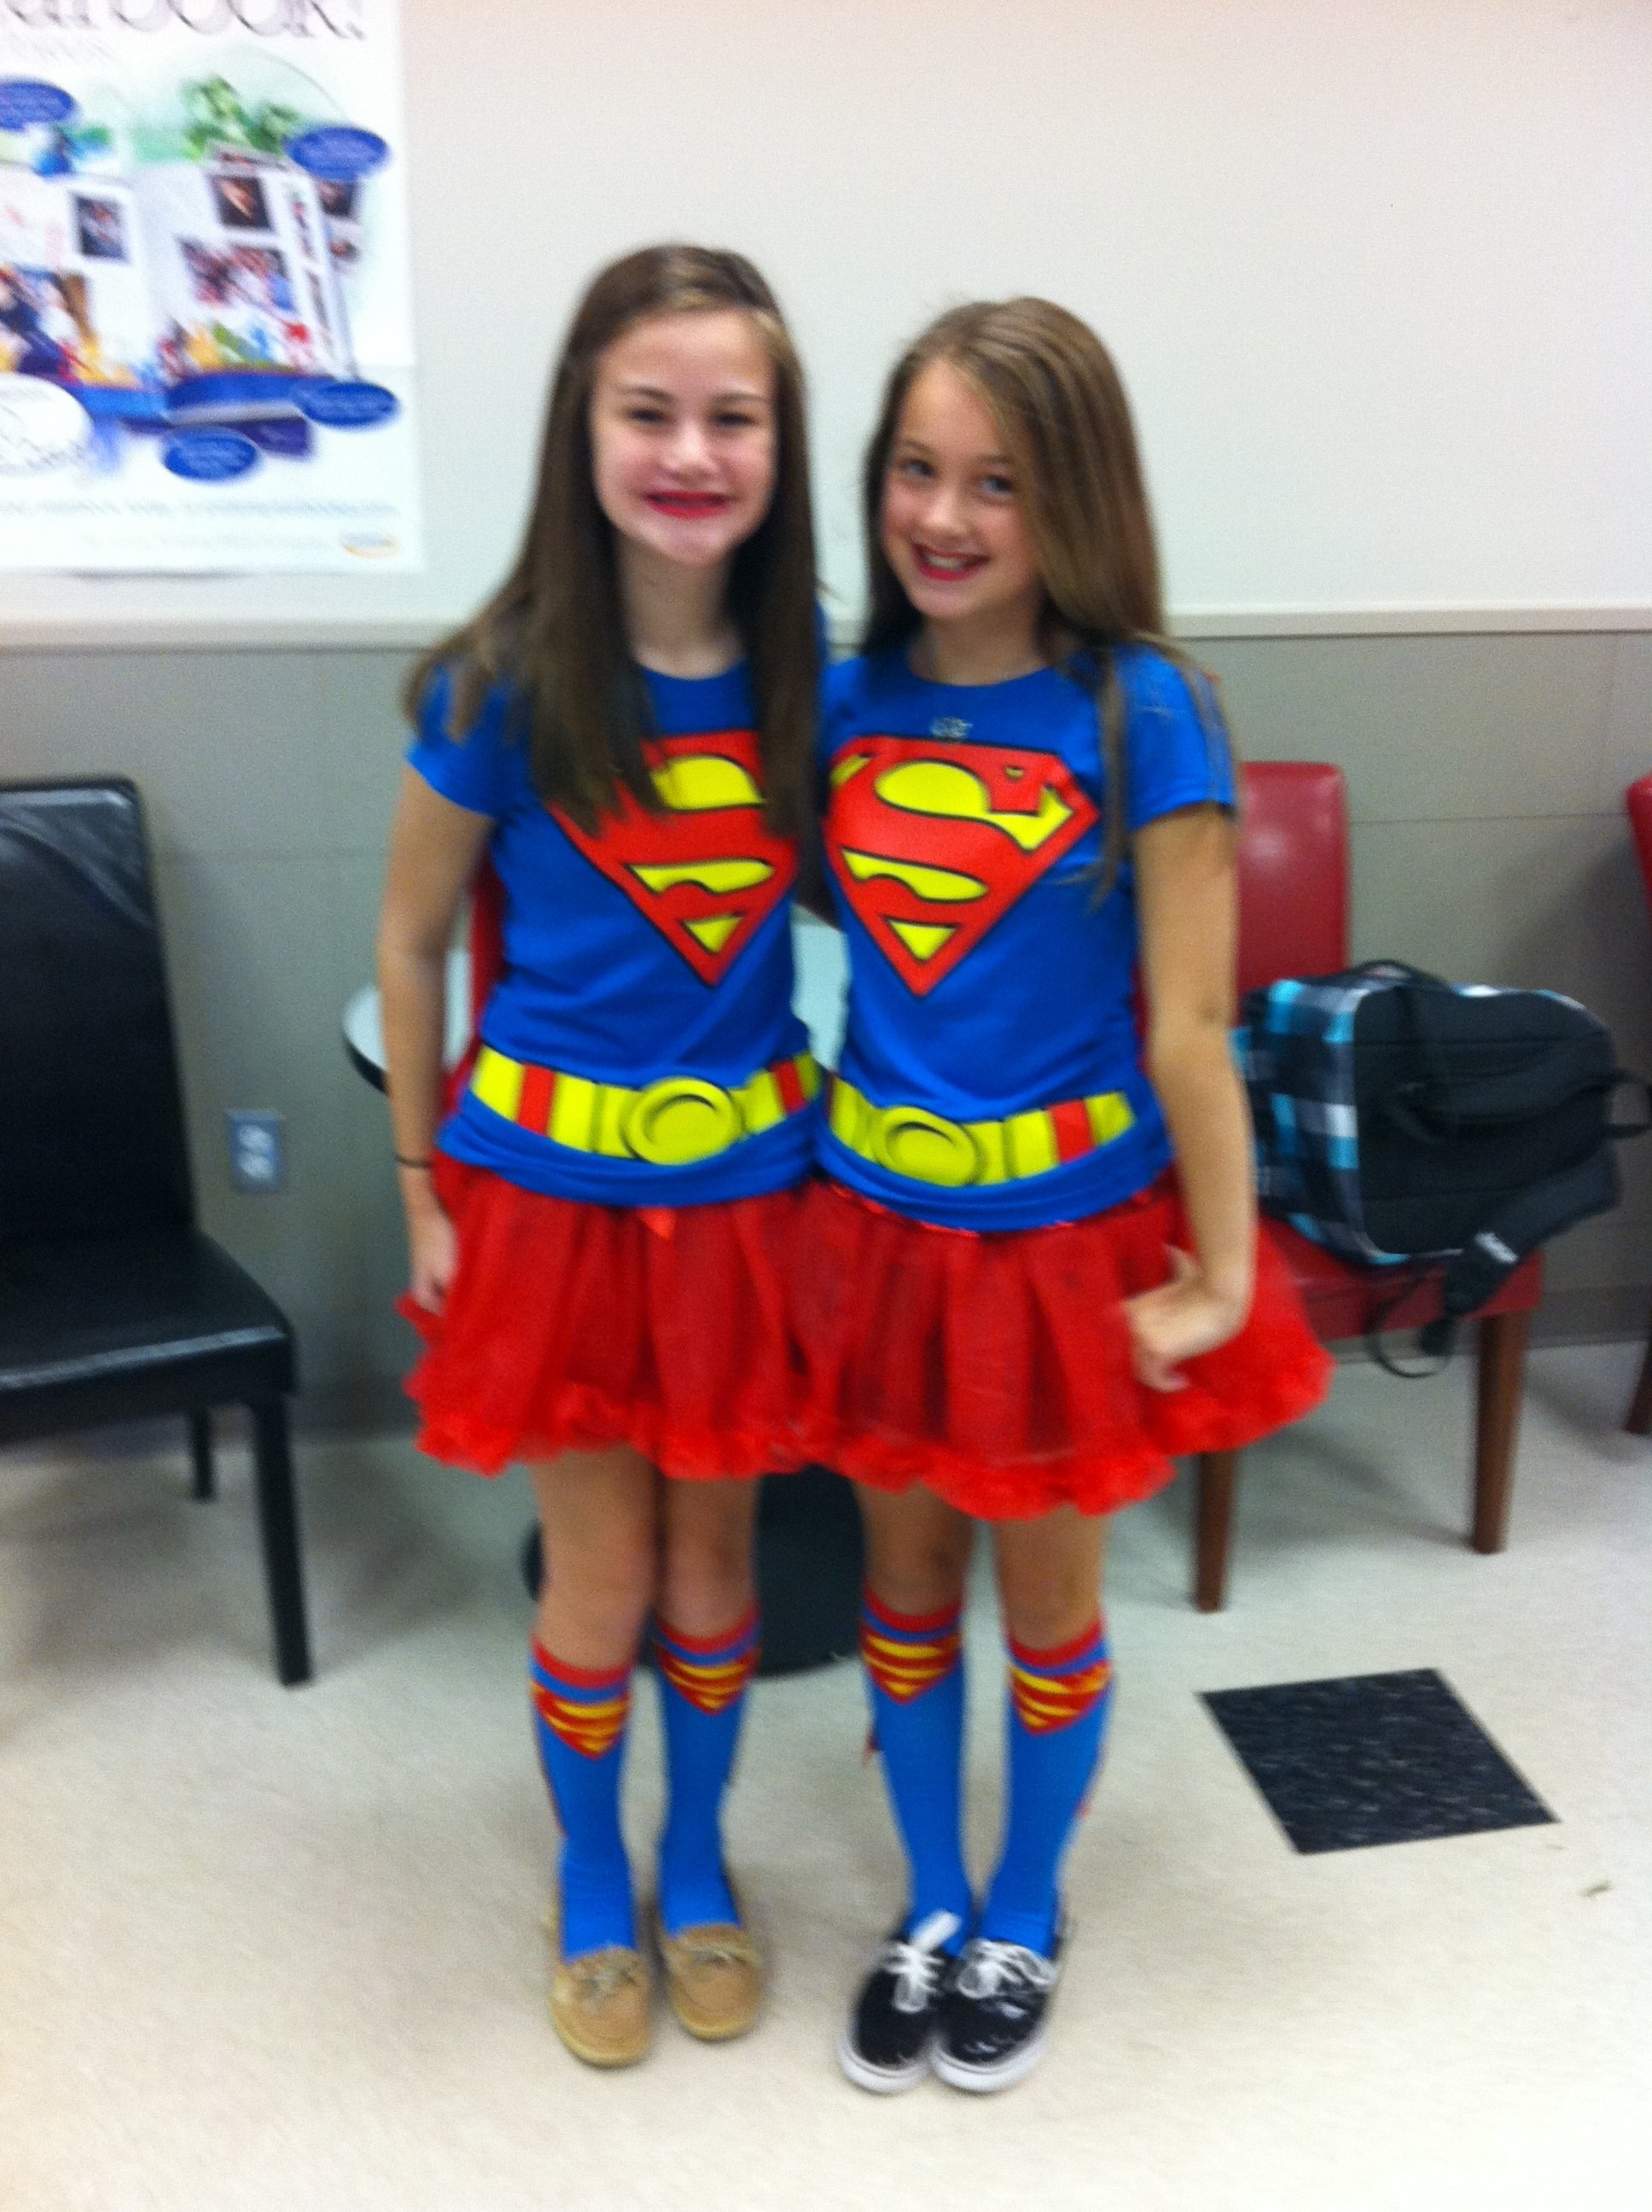 10 Nice Good Ideas For Twin Day At School pincora mannino on band camp pinterest band camp 7 2022